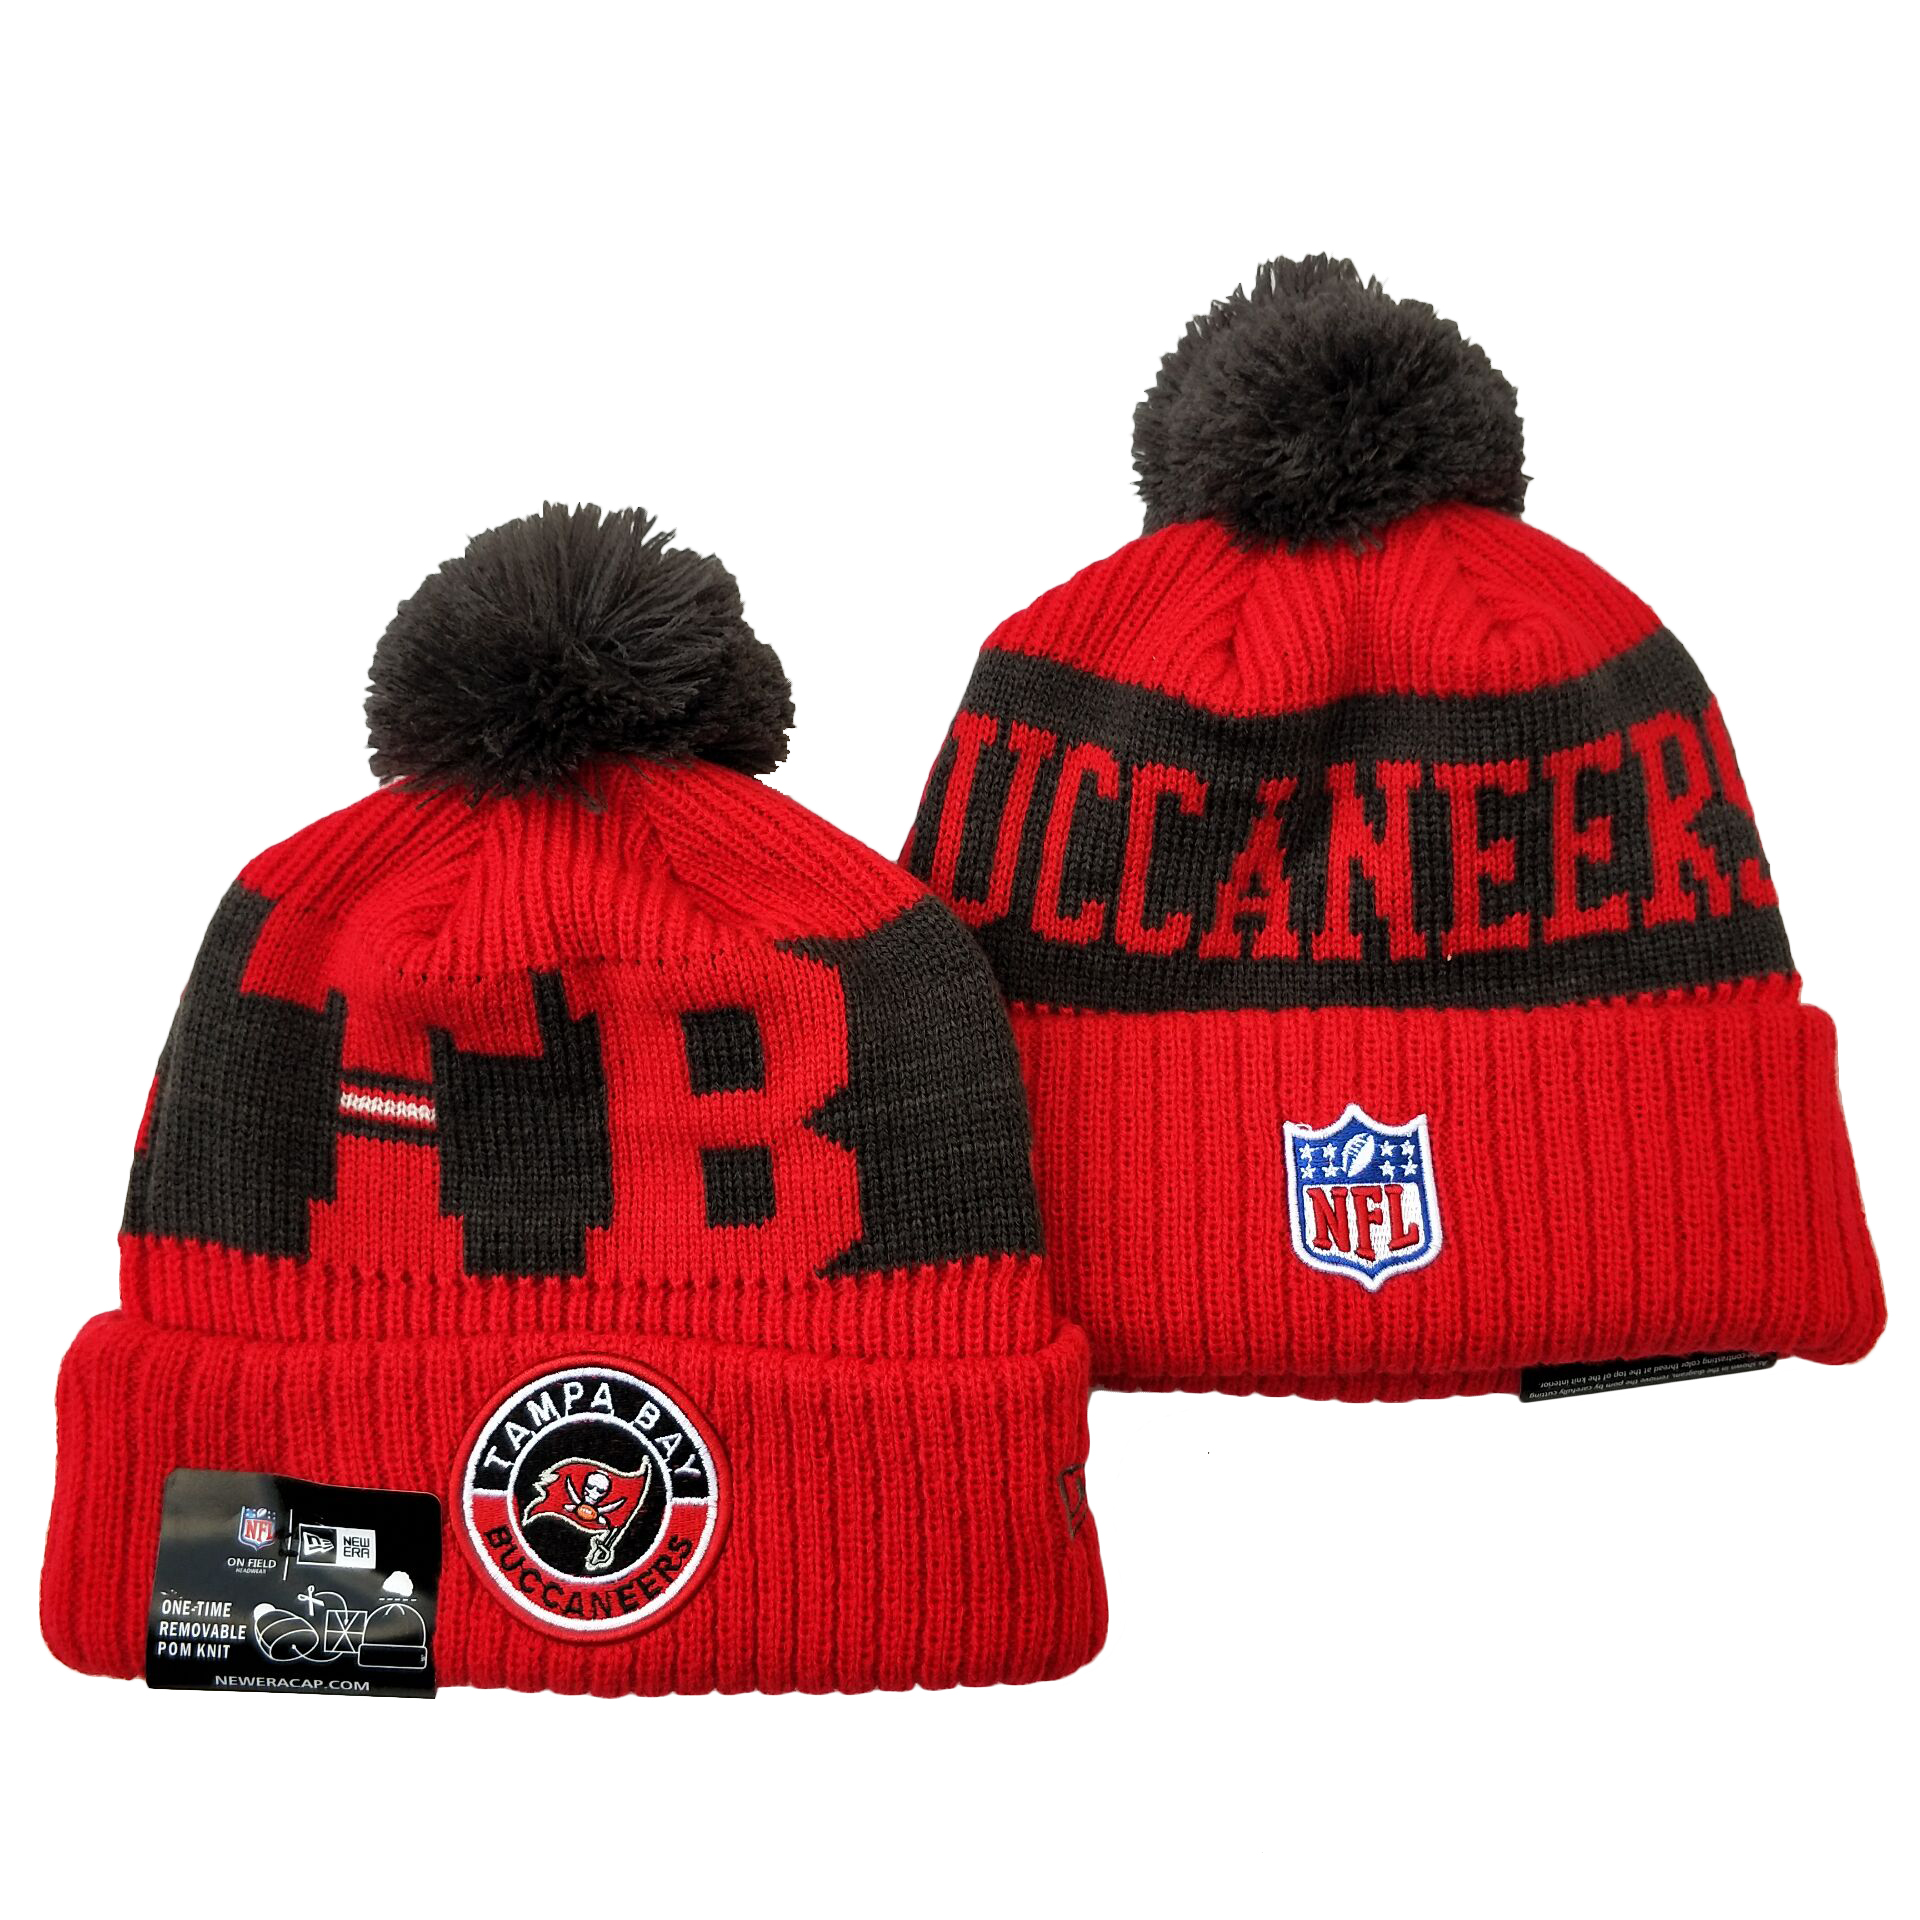 Tampa Bay Buccaneers Knit Hats 036